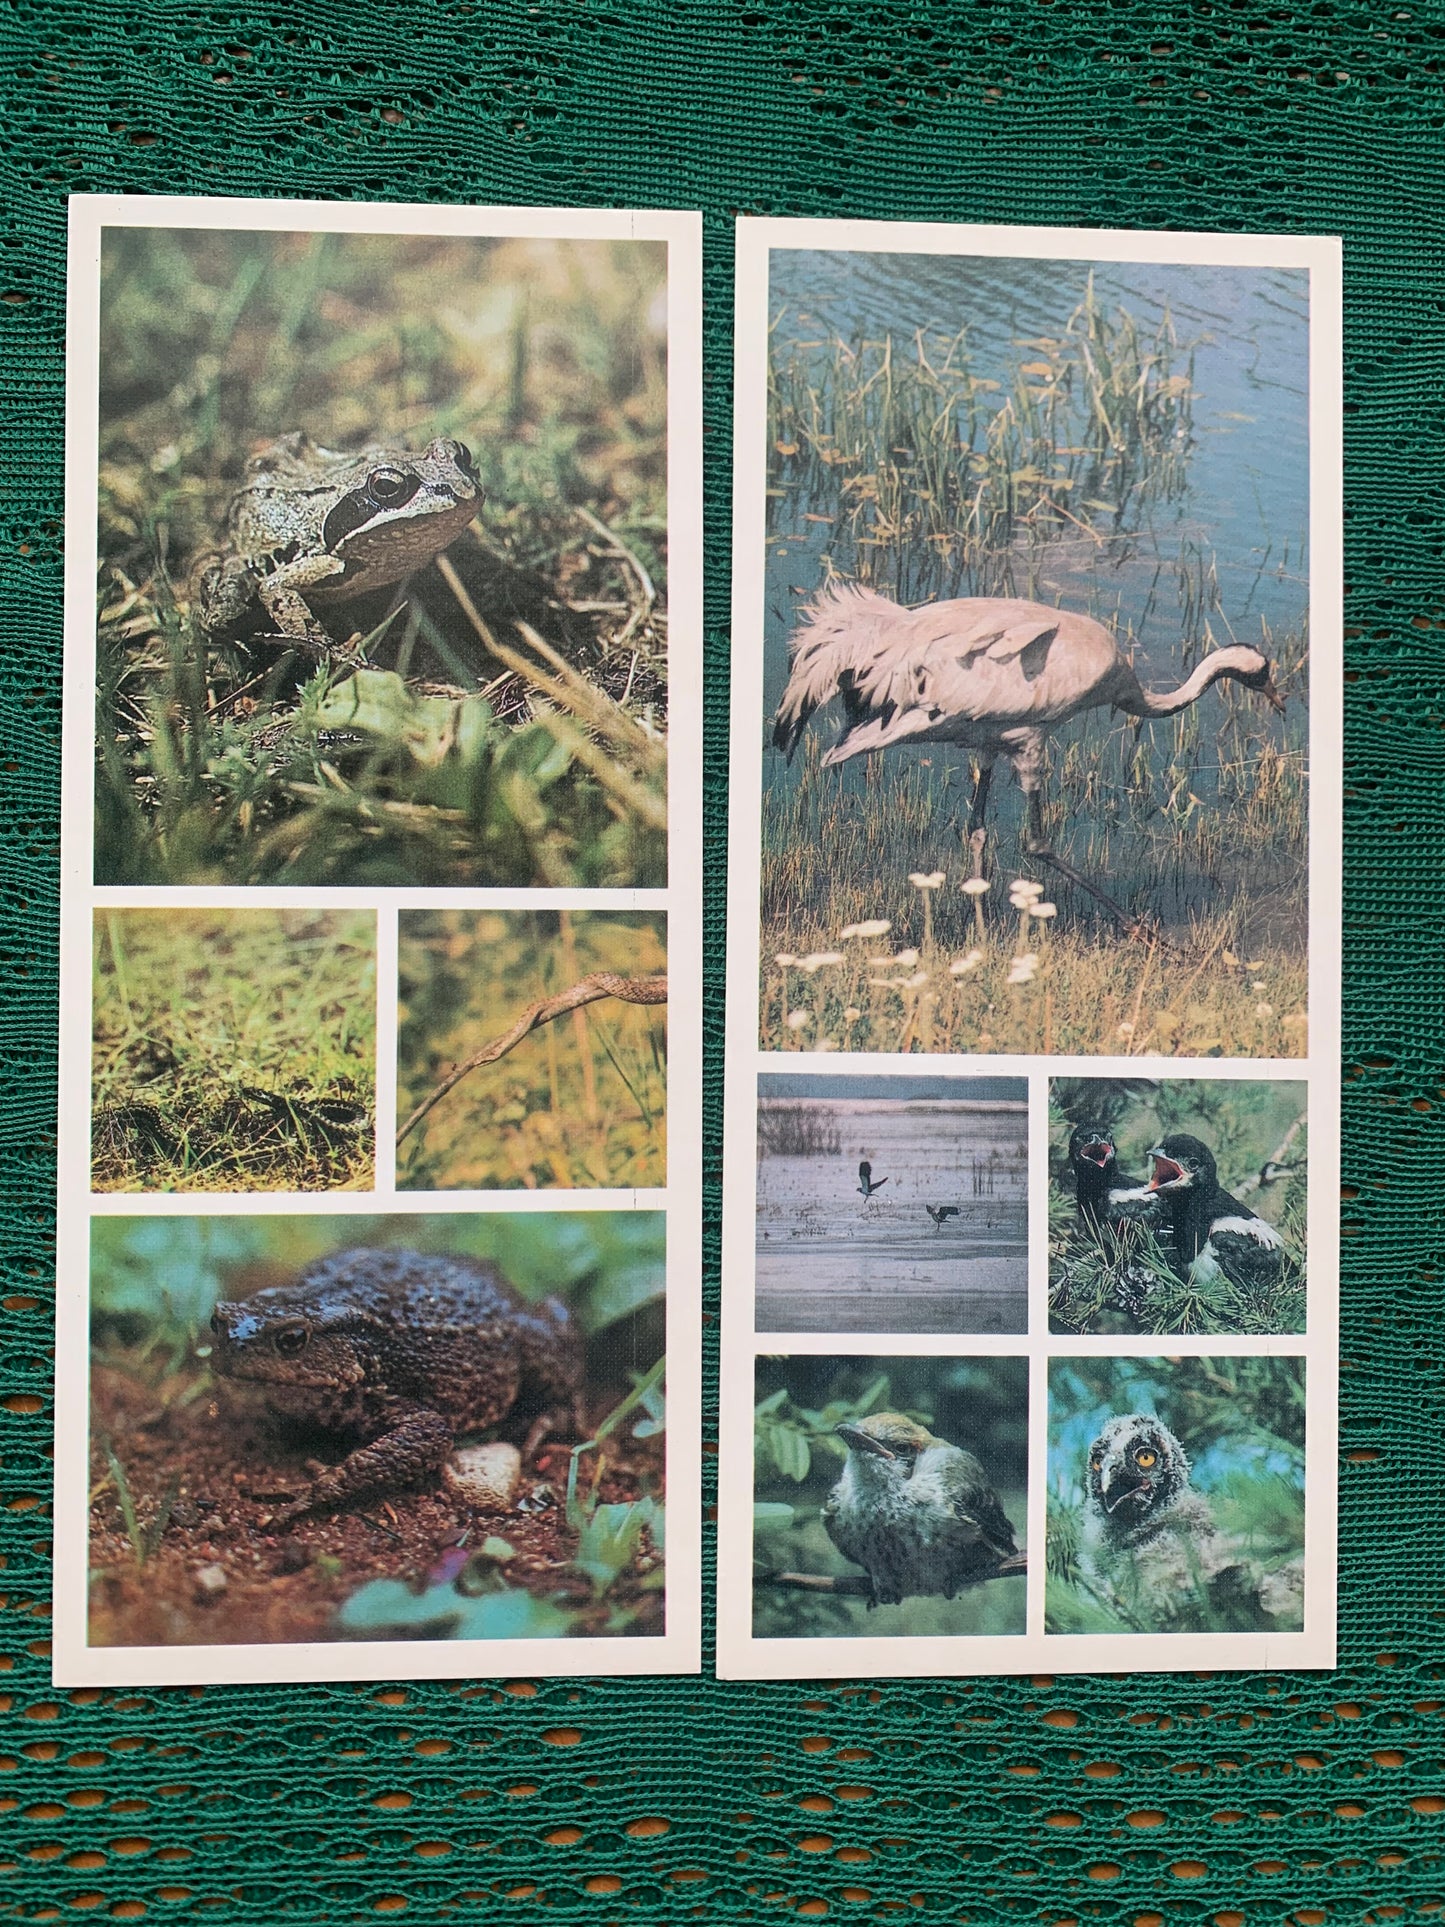 Soviet-time postcard set for collecting - Oka Nature Reserve in Russia - 1986 - unused 14 postcards